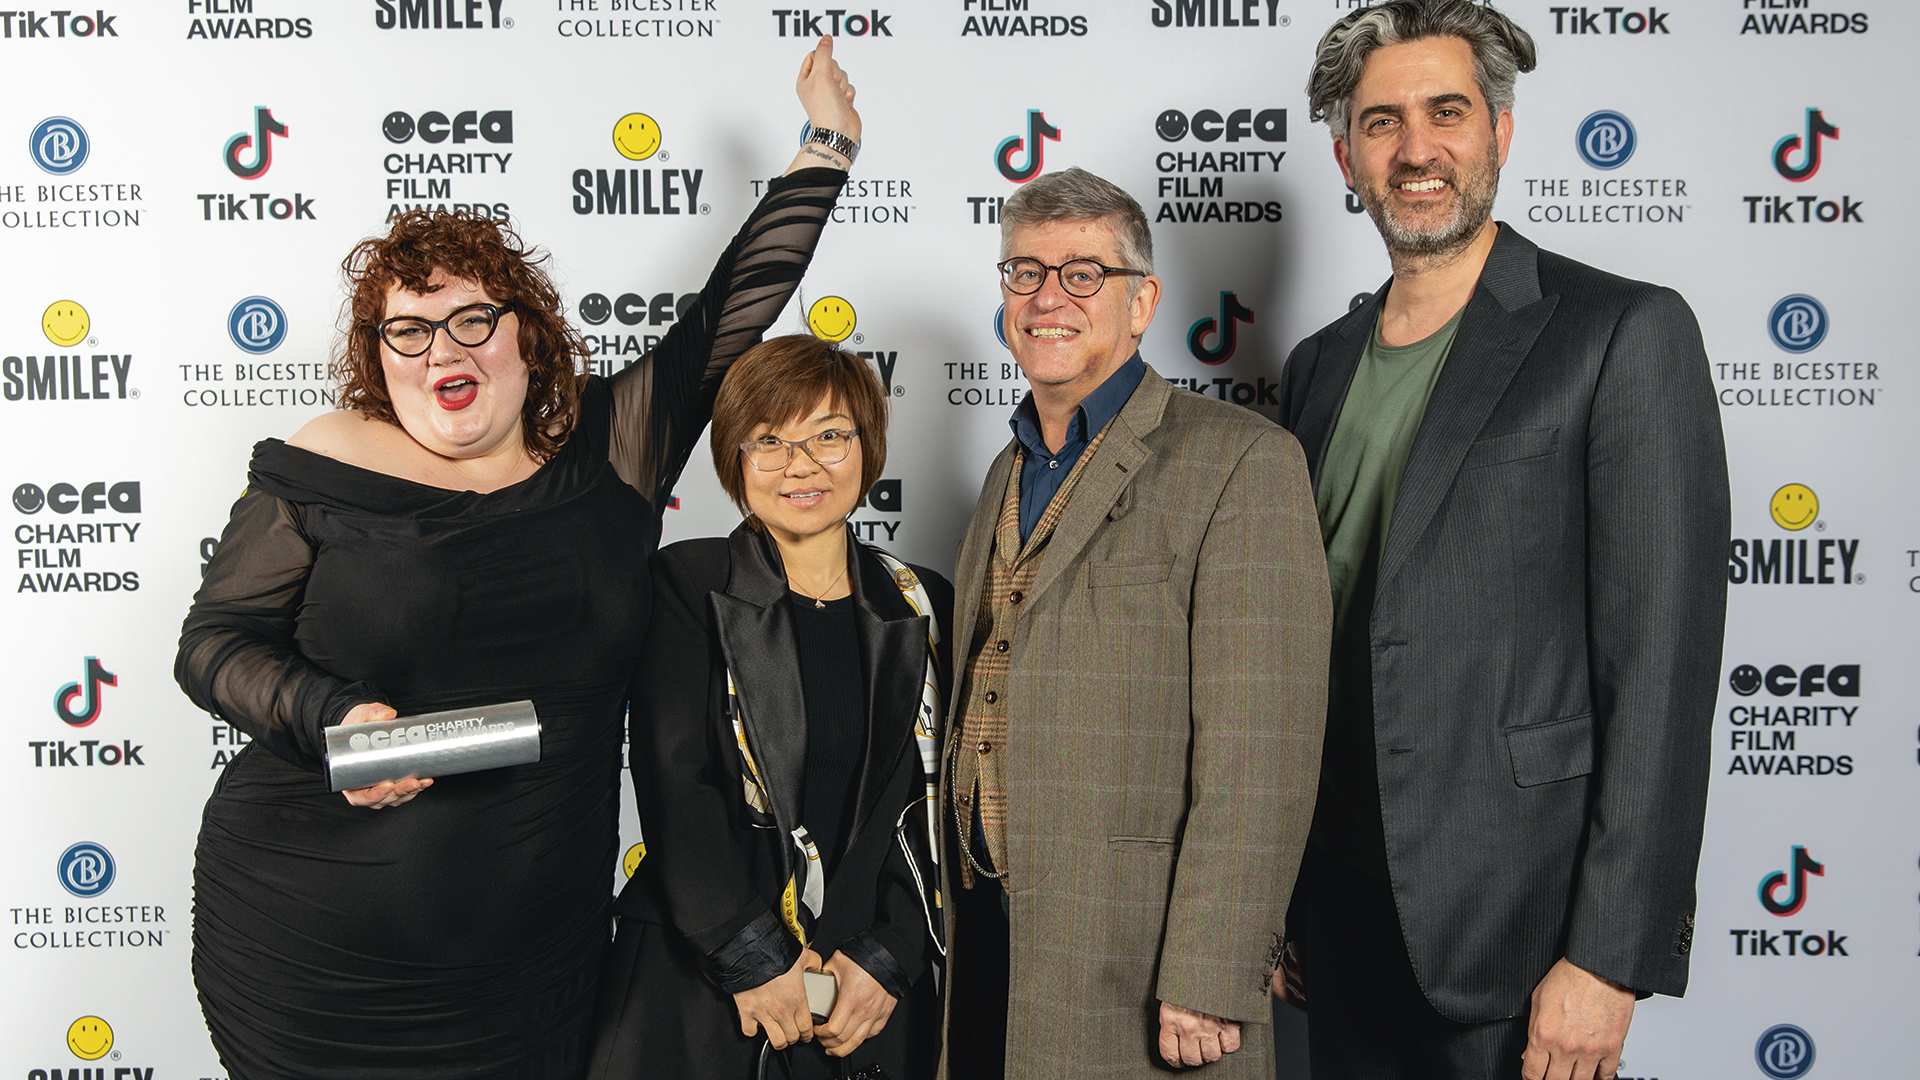 Four individuals from the Welsh Refugee Council pose together at the Charity Film Awards, standing in front of a backdrop featuring sponsor logos. From left to right: a jubilant woman holding an award, raising her arm in celebration; a woman with a short hairstyle, dressed in a black outfit with a printed scarf; a smiling man in a tweed jacket and glasses; and a man with salt-and-pepper hair, wearing a blazer over a casual shirt. All look thrilled to have just won an award.